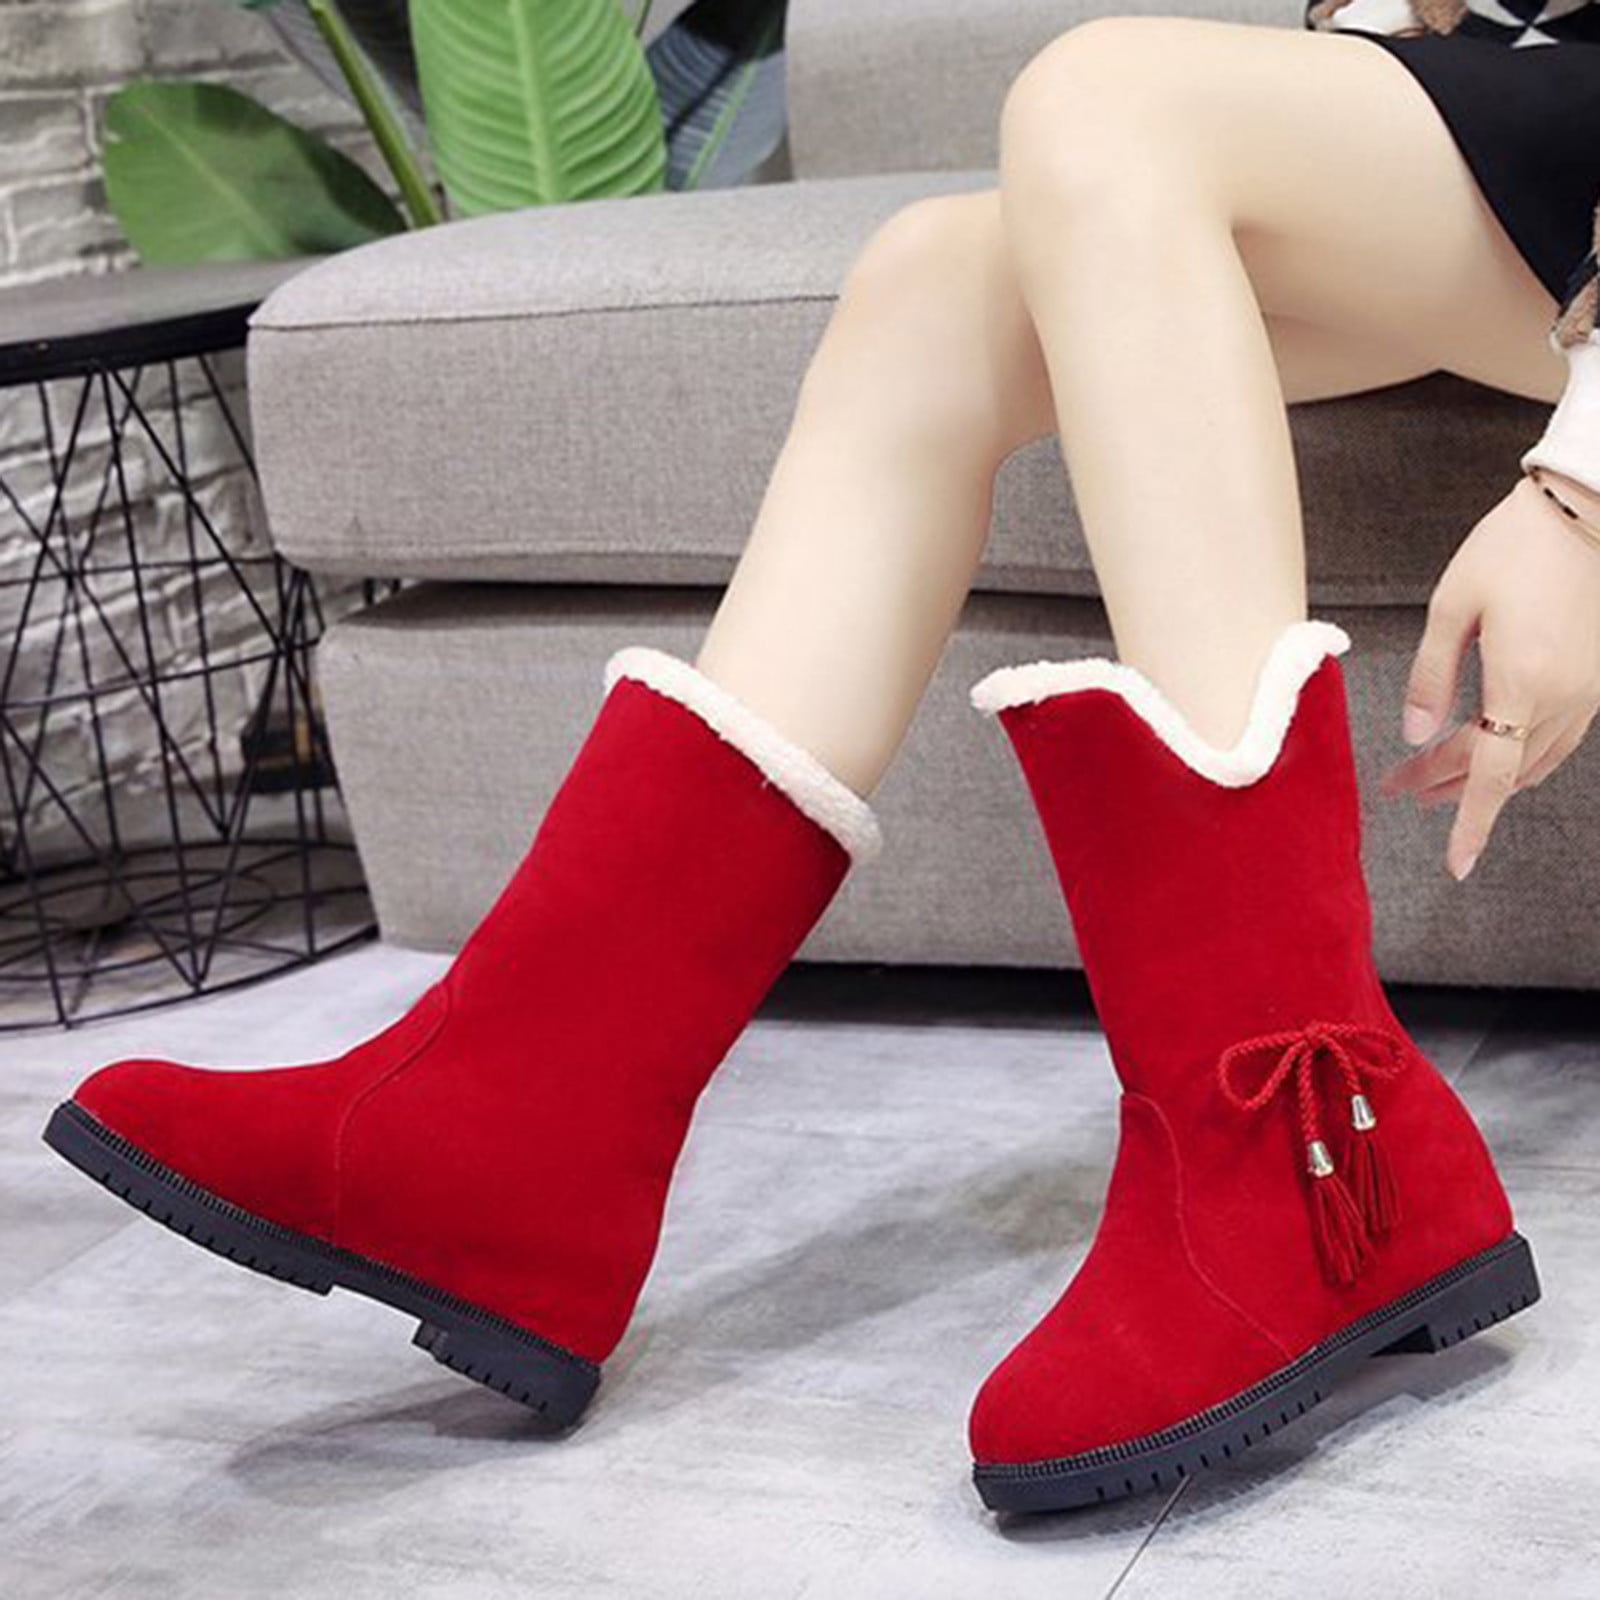 Juebong Valentine's Day Deals Womens Fashion Solid Boots Round Head Low Heel Boots Shoes,Red,7 - Walmart.com